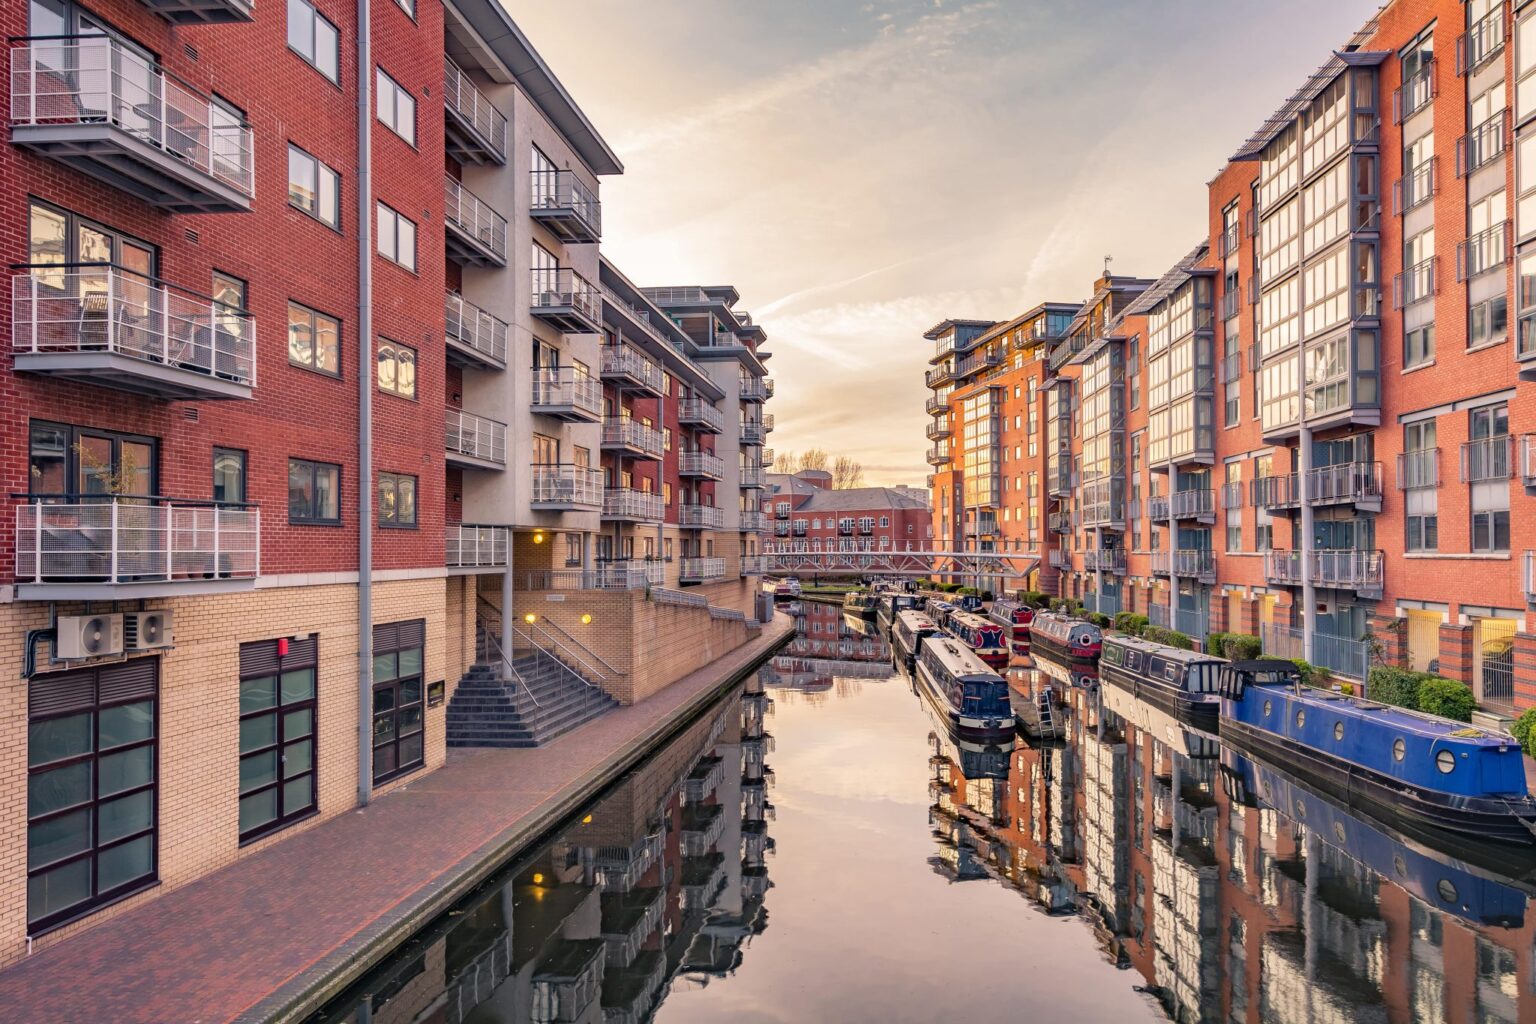 Photo of apartment buildings on either side of the Birmingham Canal